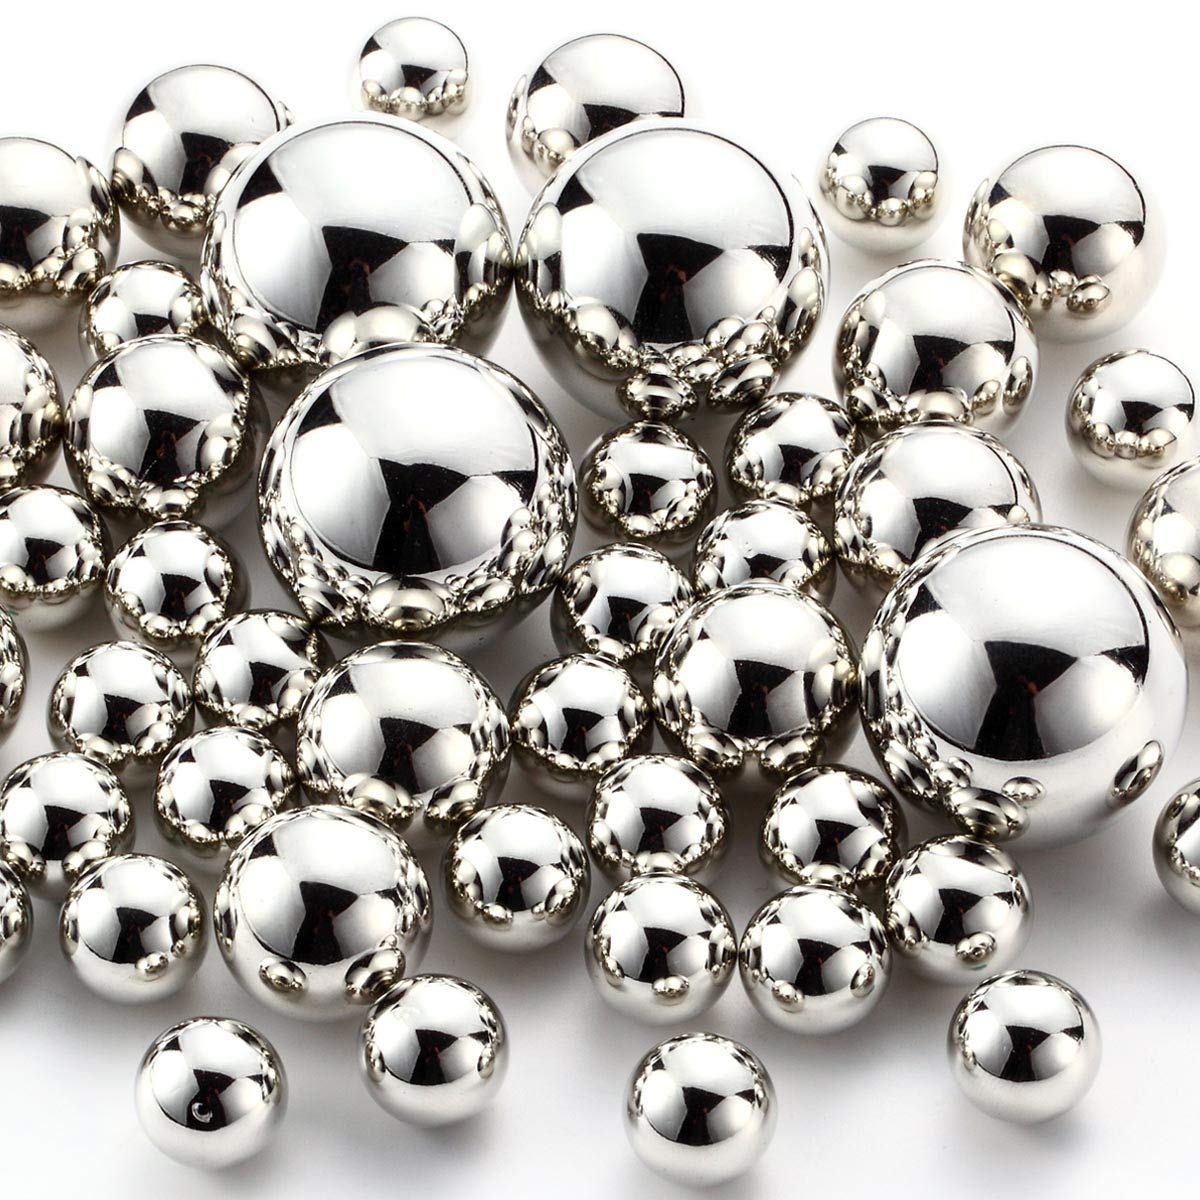 NOTCHIS 50PCS Silver Floating Pearls Beads for Vases, No Hole Highlight  Pearl Bead Vase Fillers for Centerpieces, 30mm, 20mm, and 14mm, DIY Weddings,  Anniversary, Birthday Party Centerpieces Silver 50 PCS